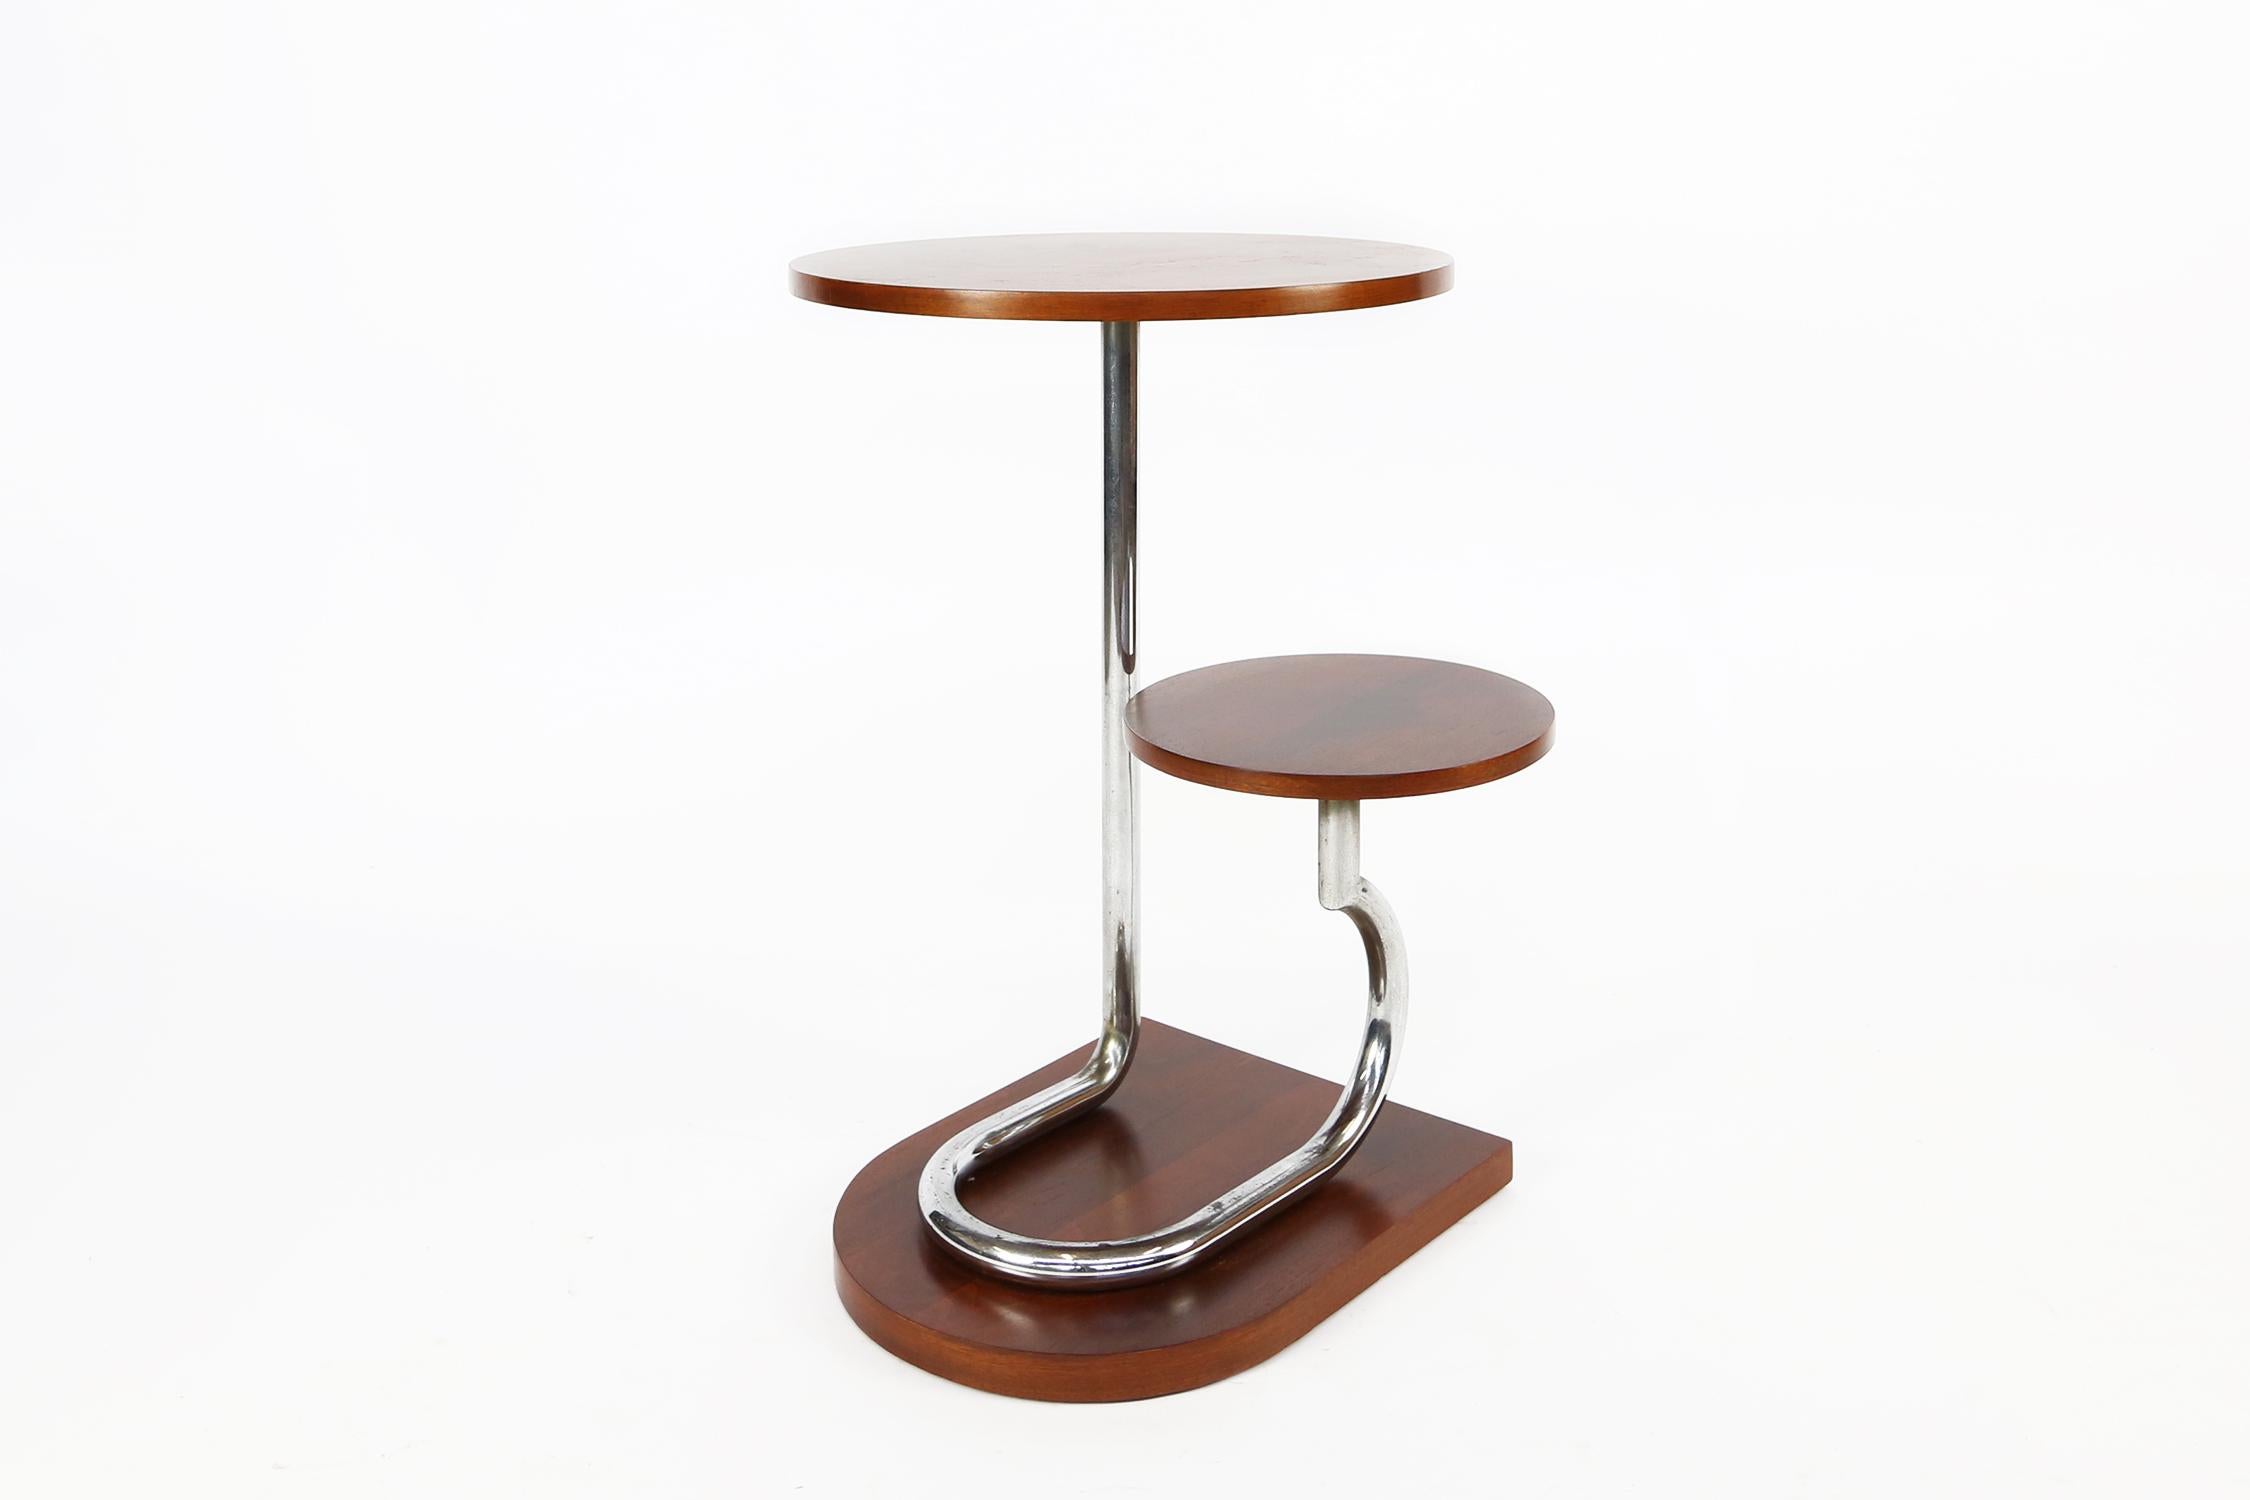 Stylish and totally authentic French, Art Deco Gueridon, dating to the 1930s. This fabulous table is great to display items, or as plant stand. Features two-tiered circular platforms supported on chrome tubular poles the whole having an asymmetrical